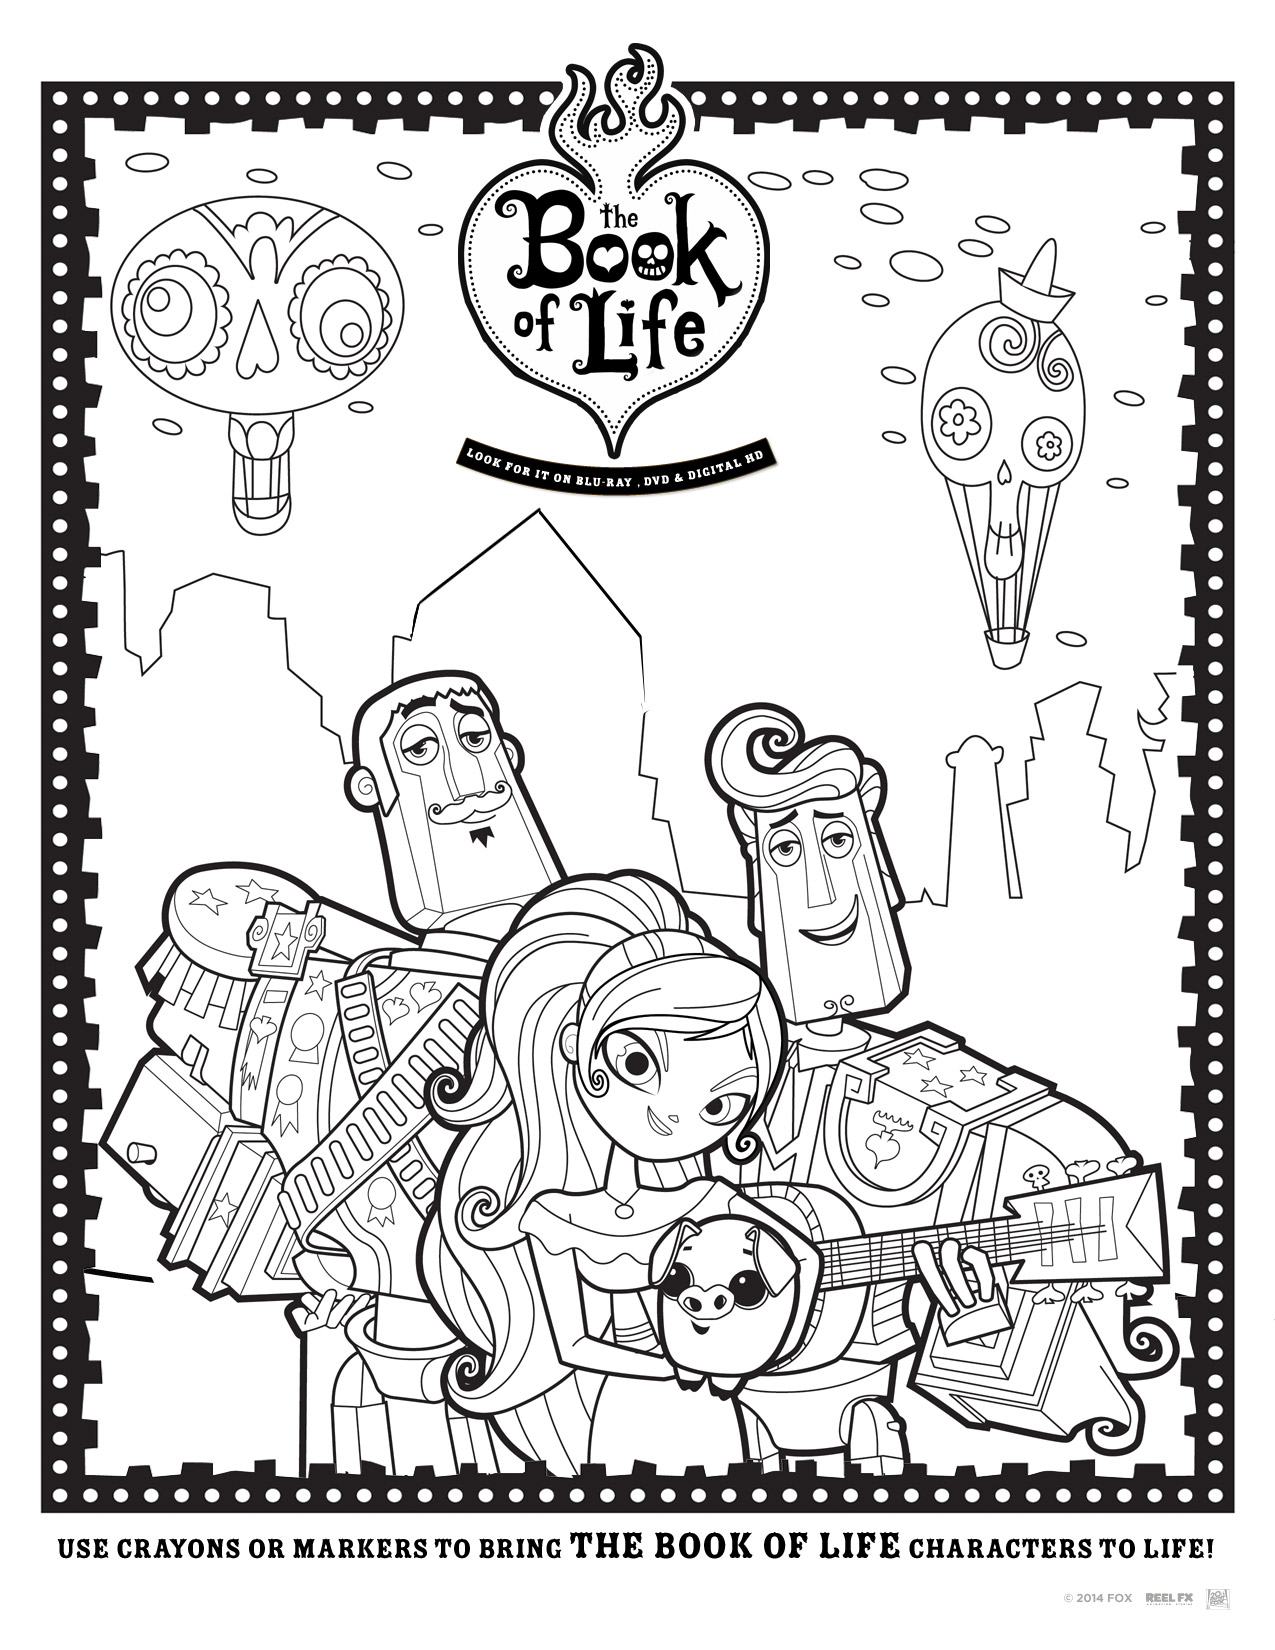 Free Book of Life Coloring Pages and Activity Sheets #BOLinsiders